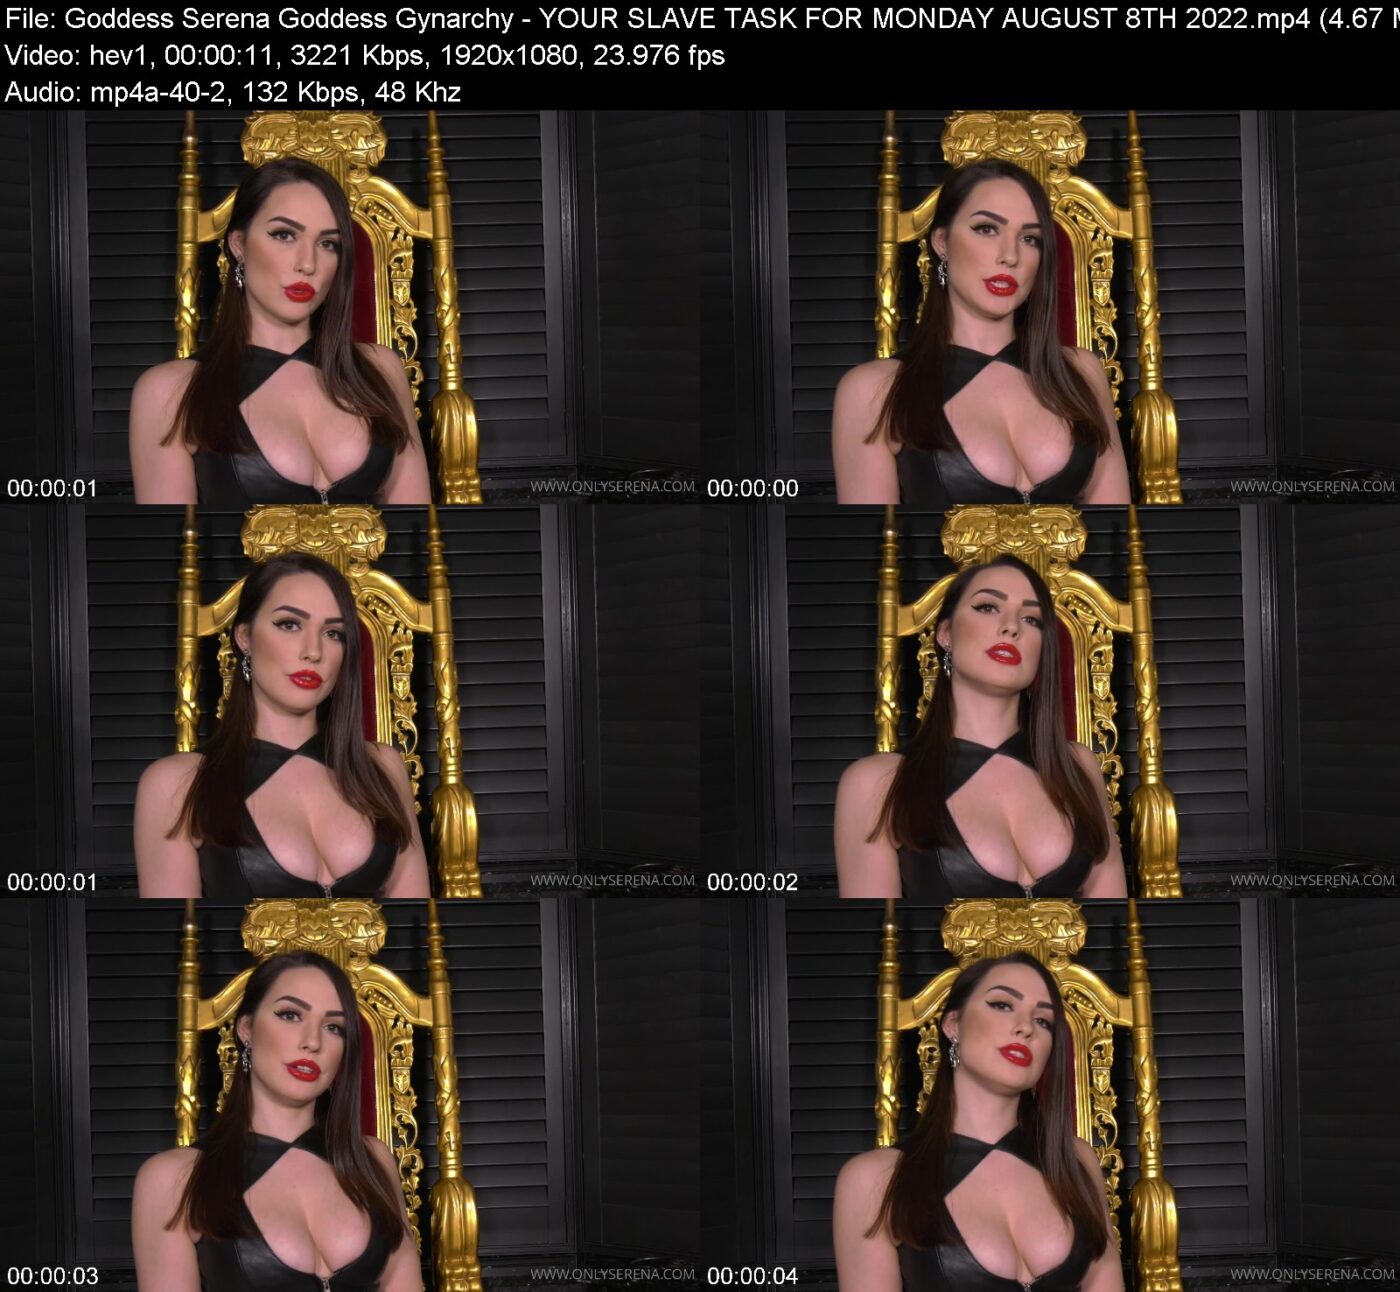 Actress: Goddess Serena Goddess Gynarchy. Title and Studio: YOUR SLAVE TASK FOR MONDAY AUGUST 8TH 2022